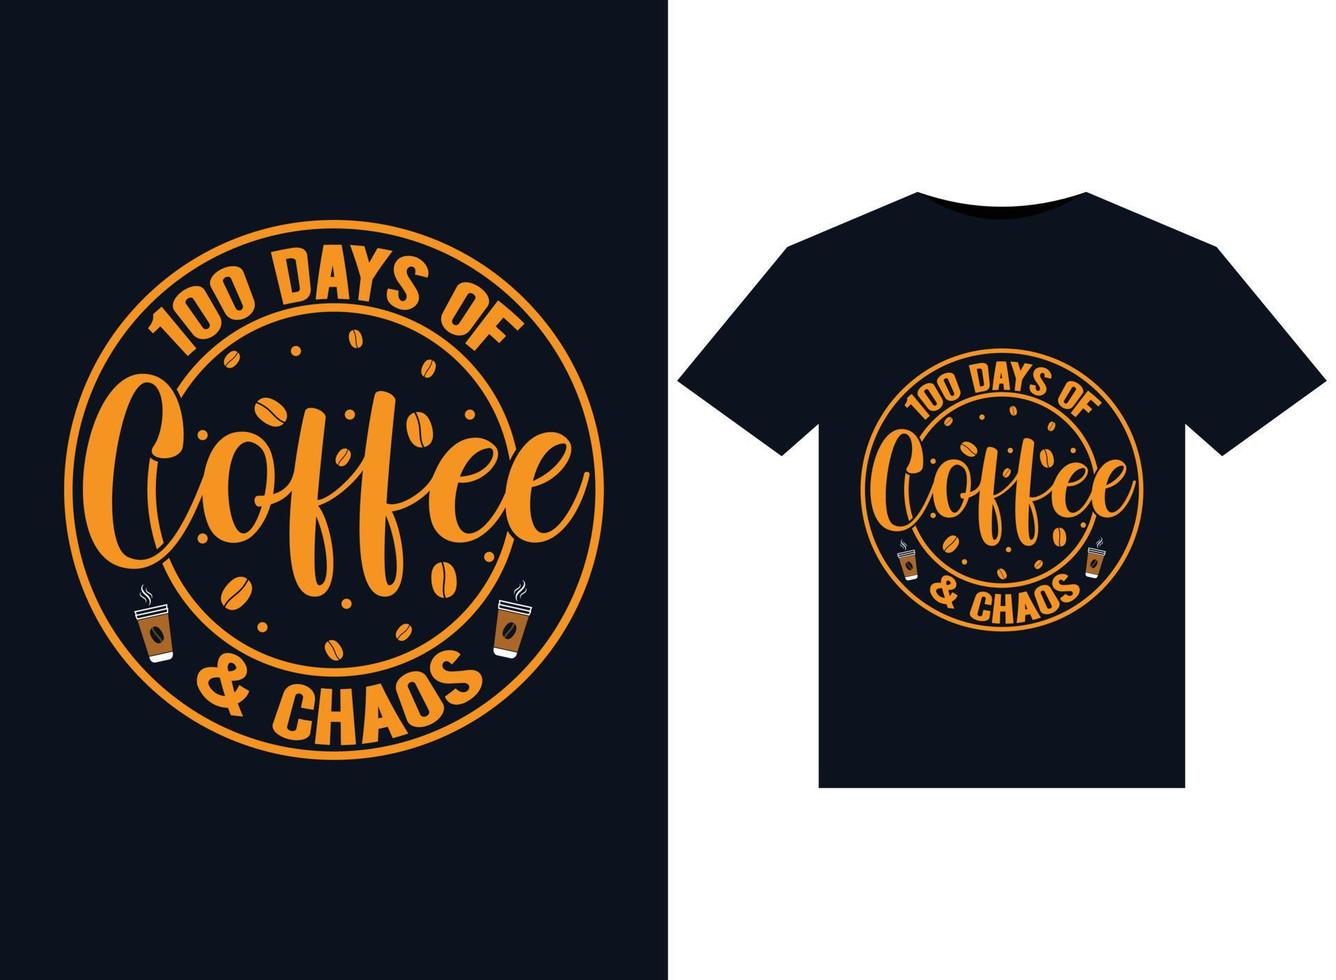 100 Days Of Coffee  Chaos illustrations for print-ready T-Shirts design vector